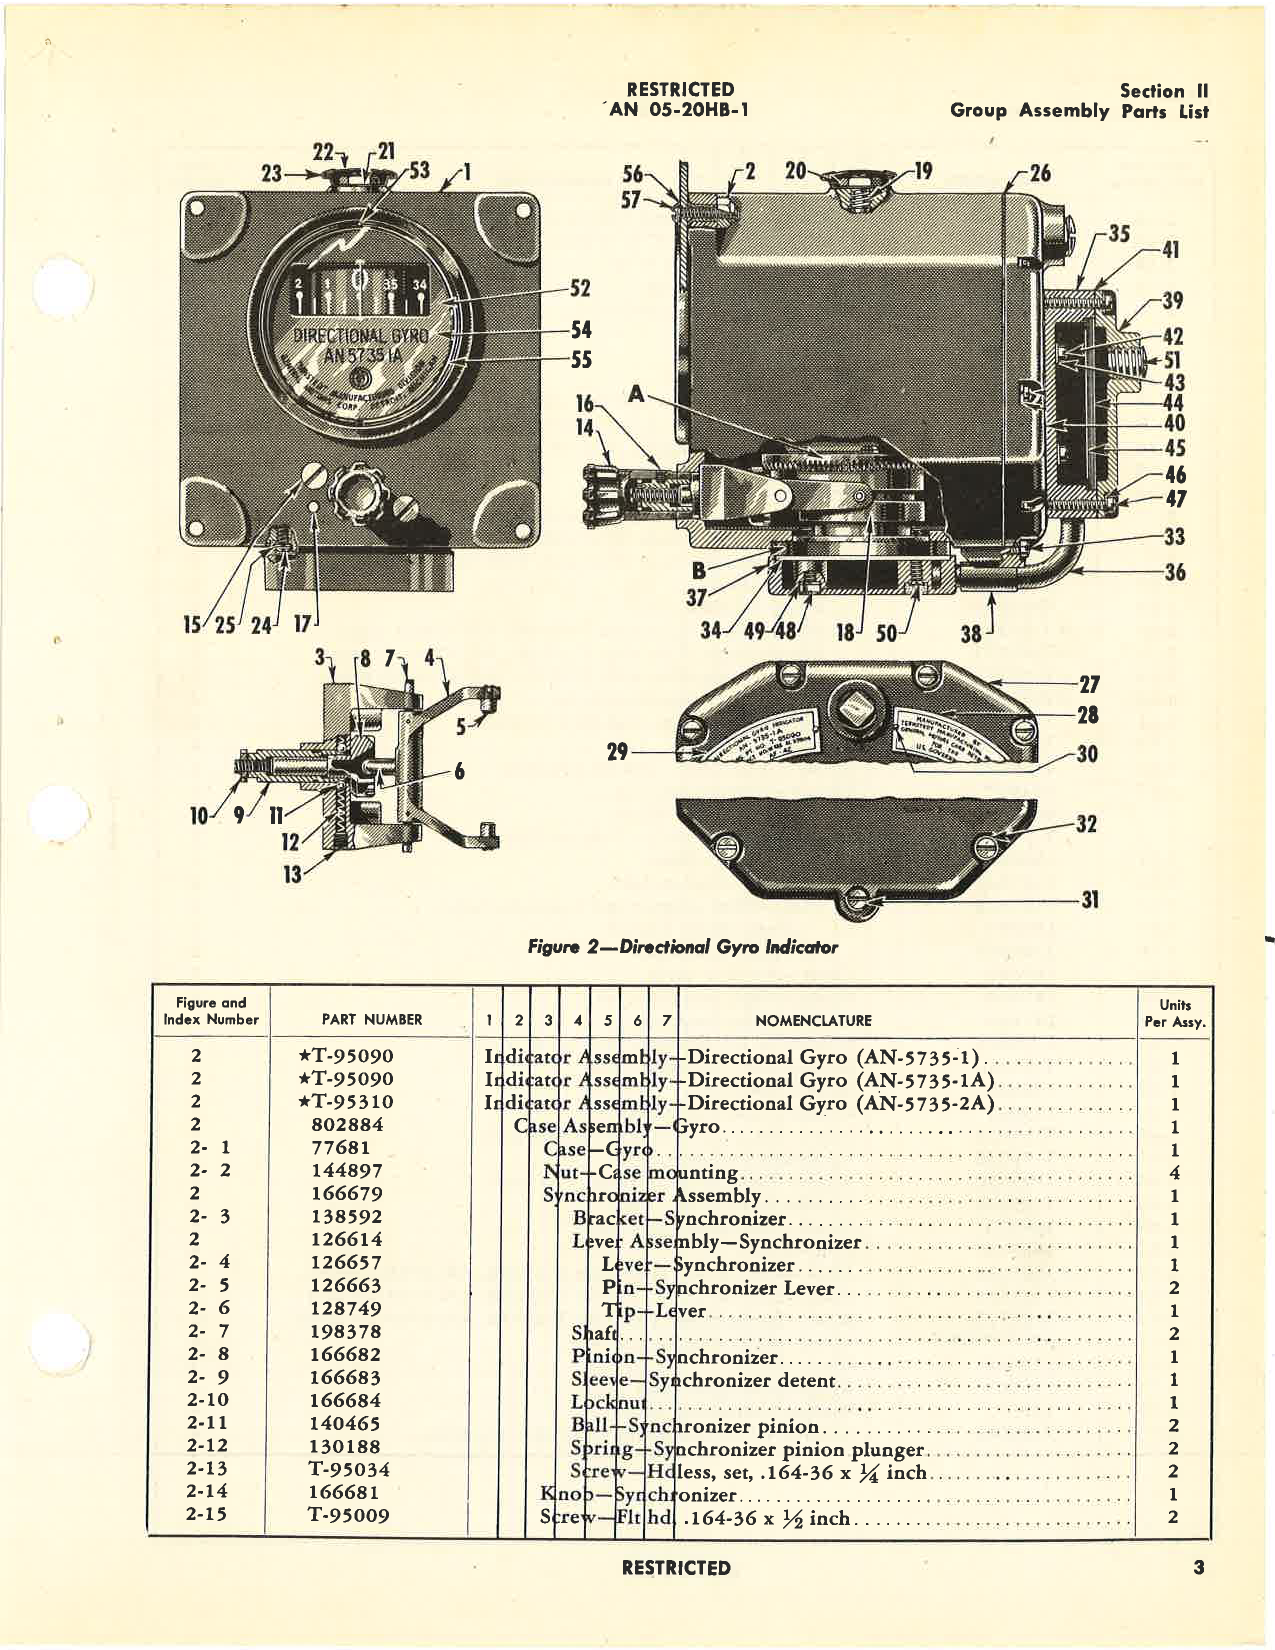 Sample page 8 from AirCorps Library document: Parts Catalog for Directional Gyro Indicator Types AN-5735-1A and AN-5735-2A